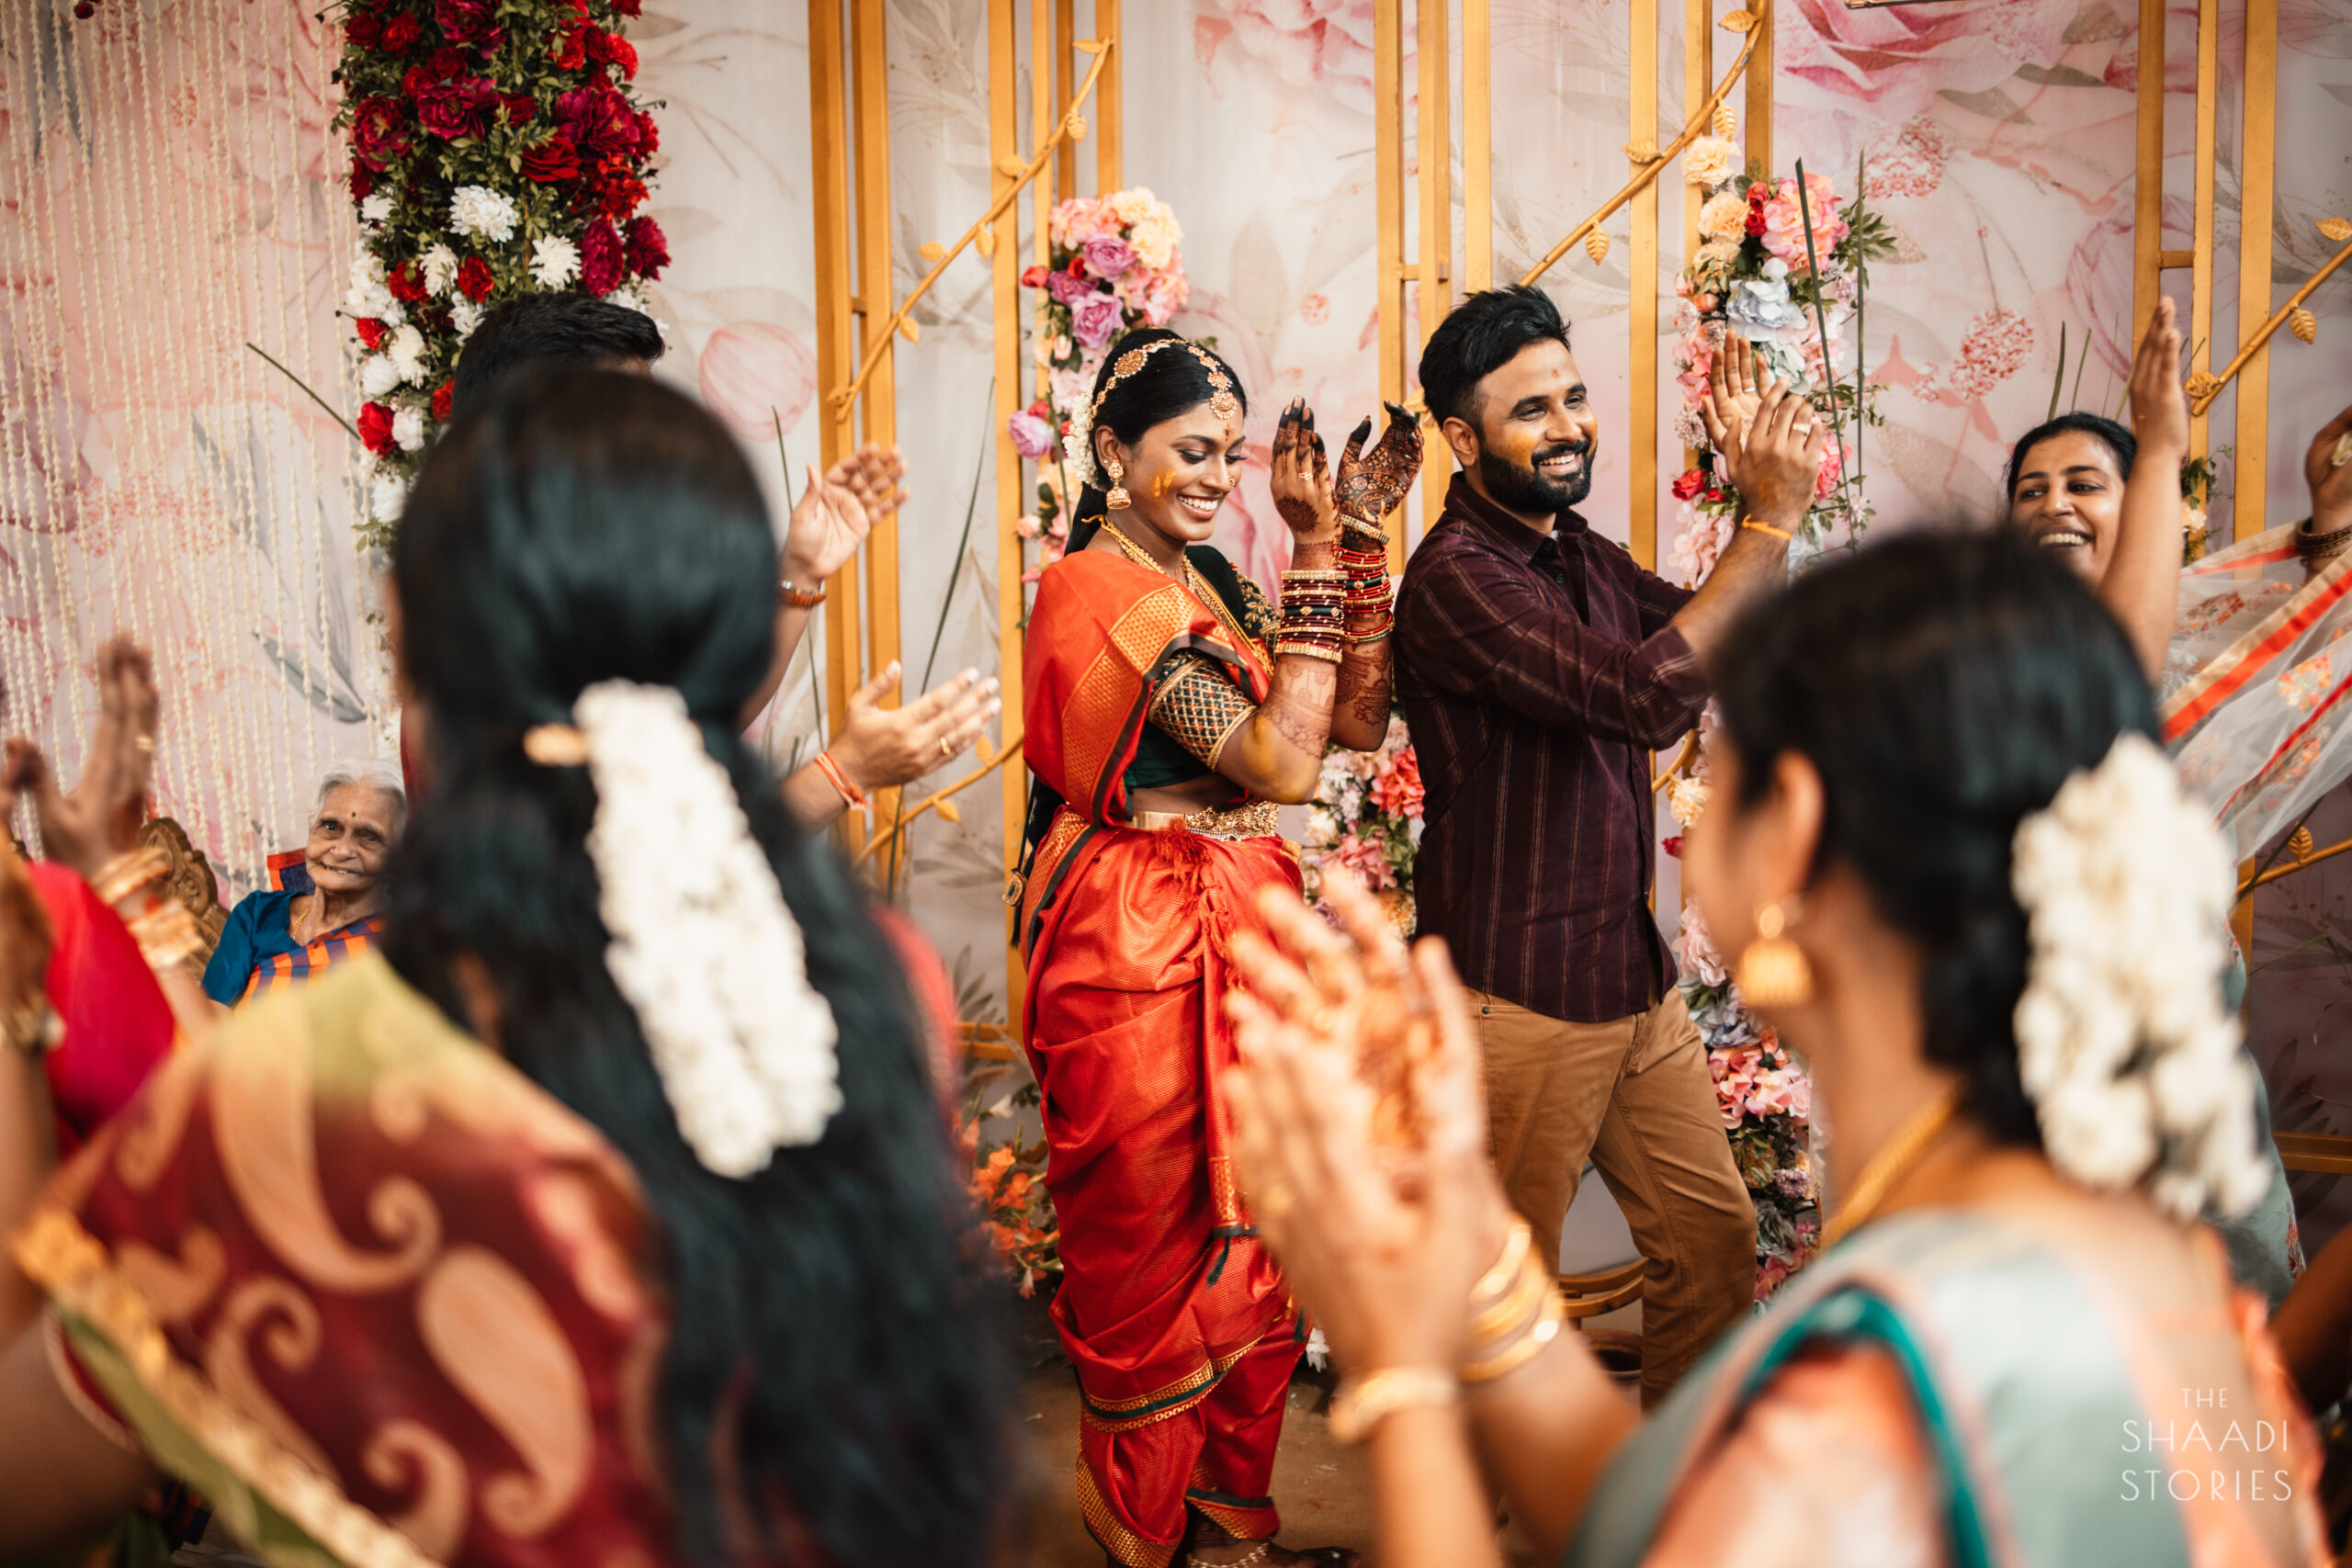 7 Marriage Poses Ideas Which Are Perfect to Show Your Love for Each Other  Without Saying a Word